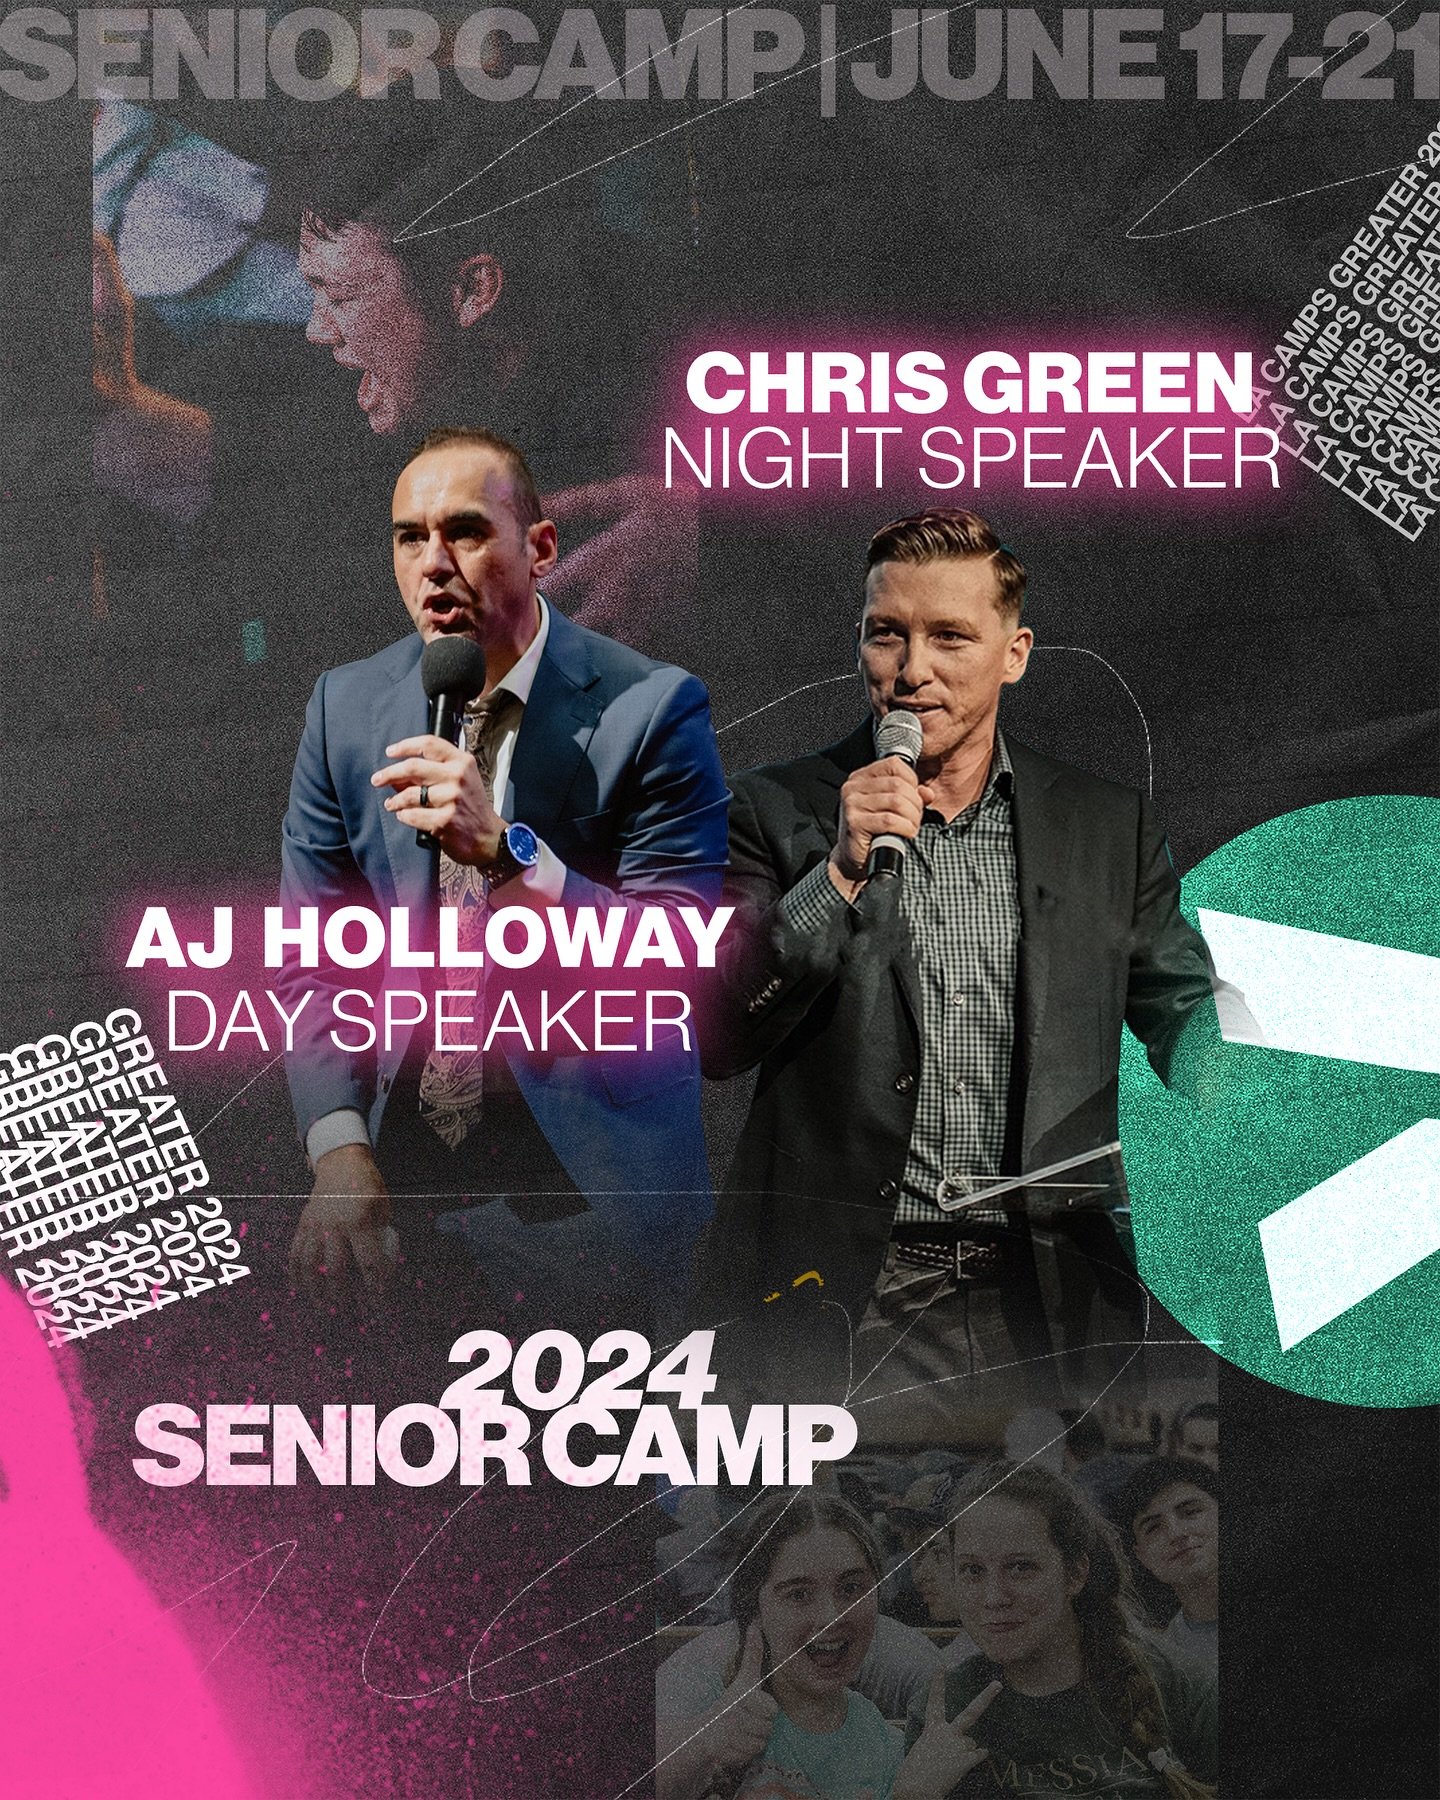 Our 2024 Senior Camp speakers!! @hyphenonline camp speakers dropping soon!! 🤯🤯
&bull;&bull;&bull;
Only about a month away from registration closing! 🚨 Visit the link in our bio or our website for more info about LA Youth Camps and links to registe